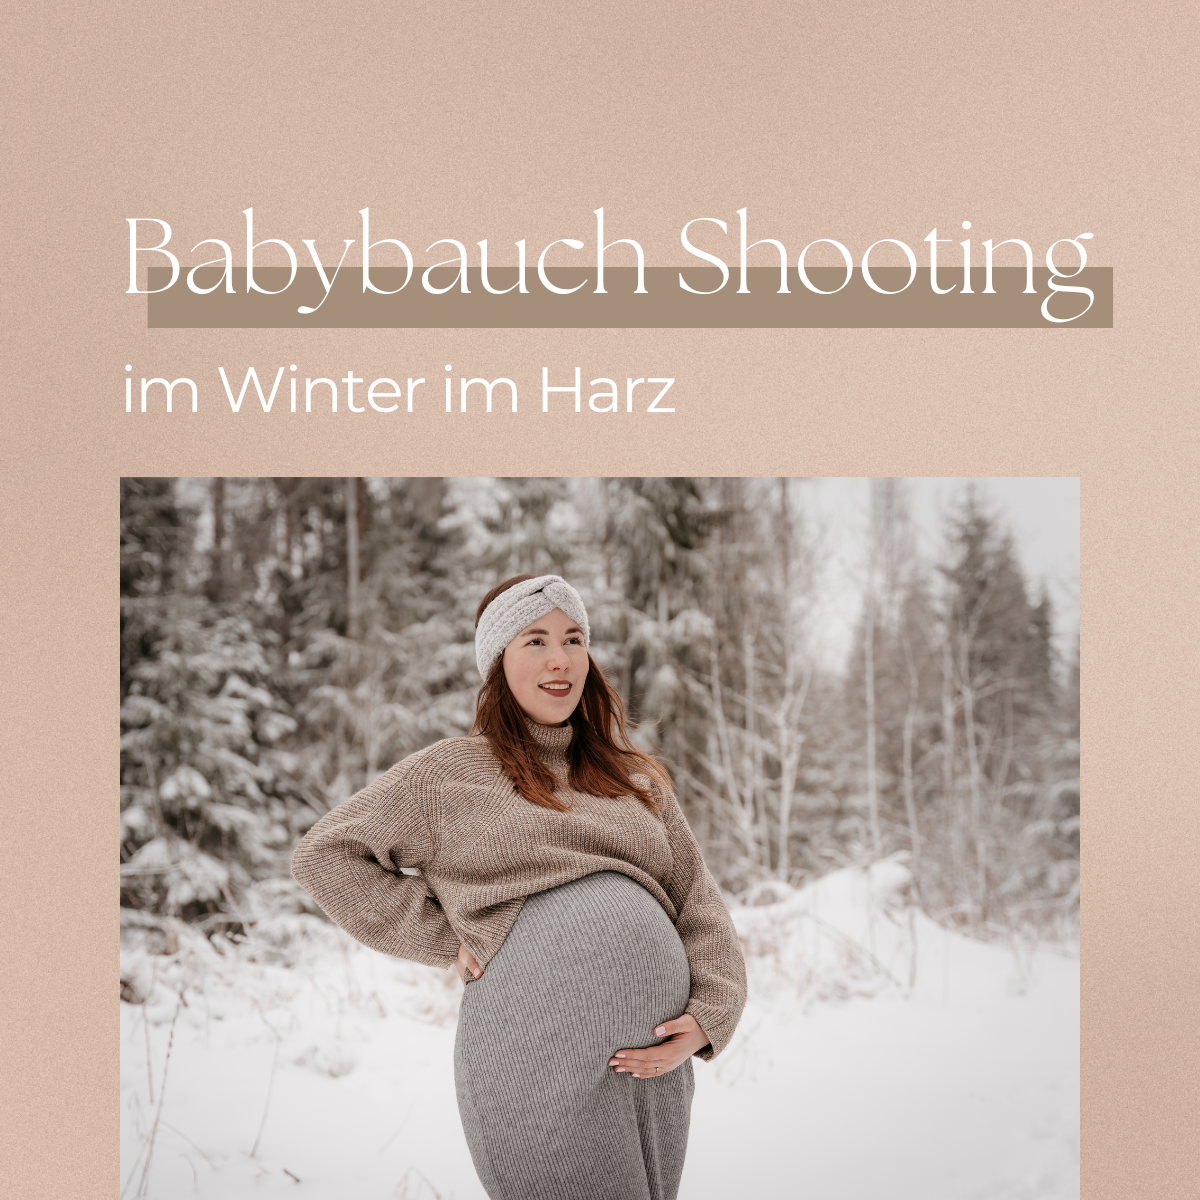 Read more about the article Babybauchshooting im Winter im Harz